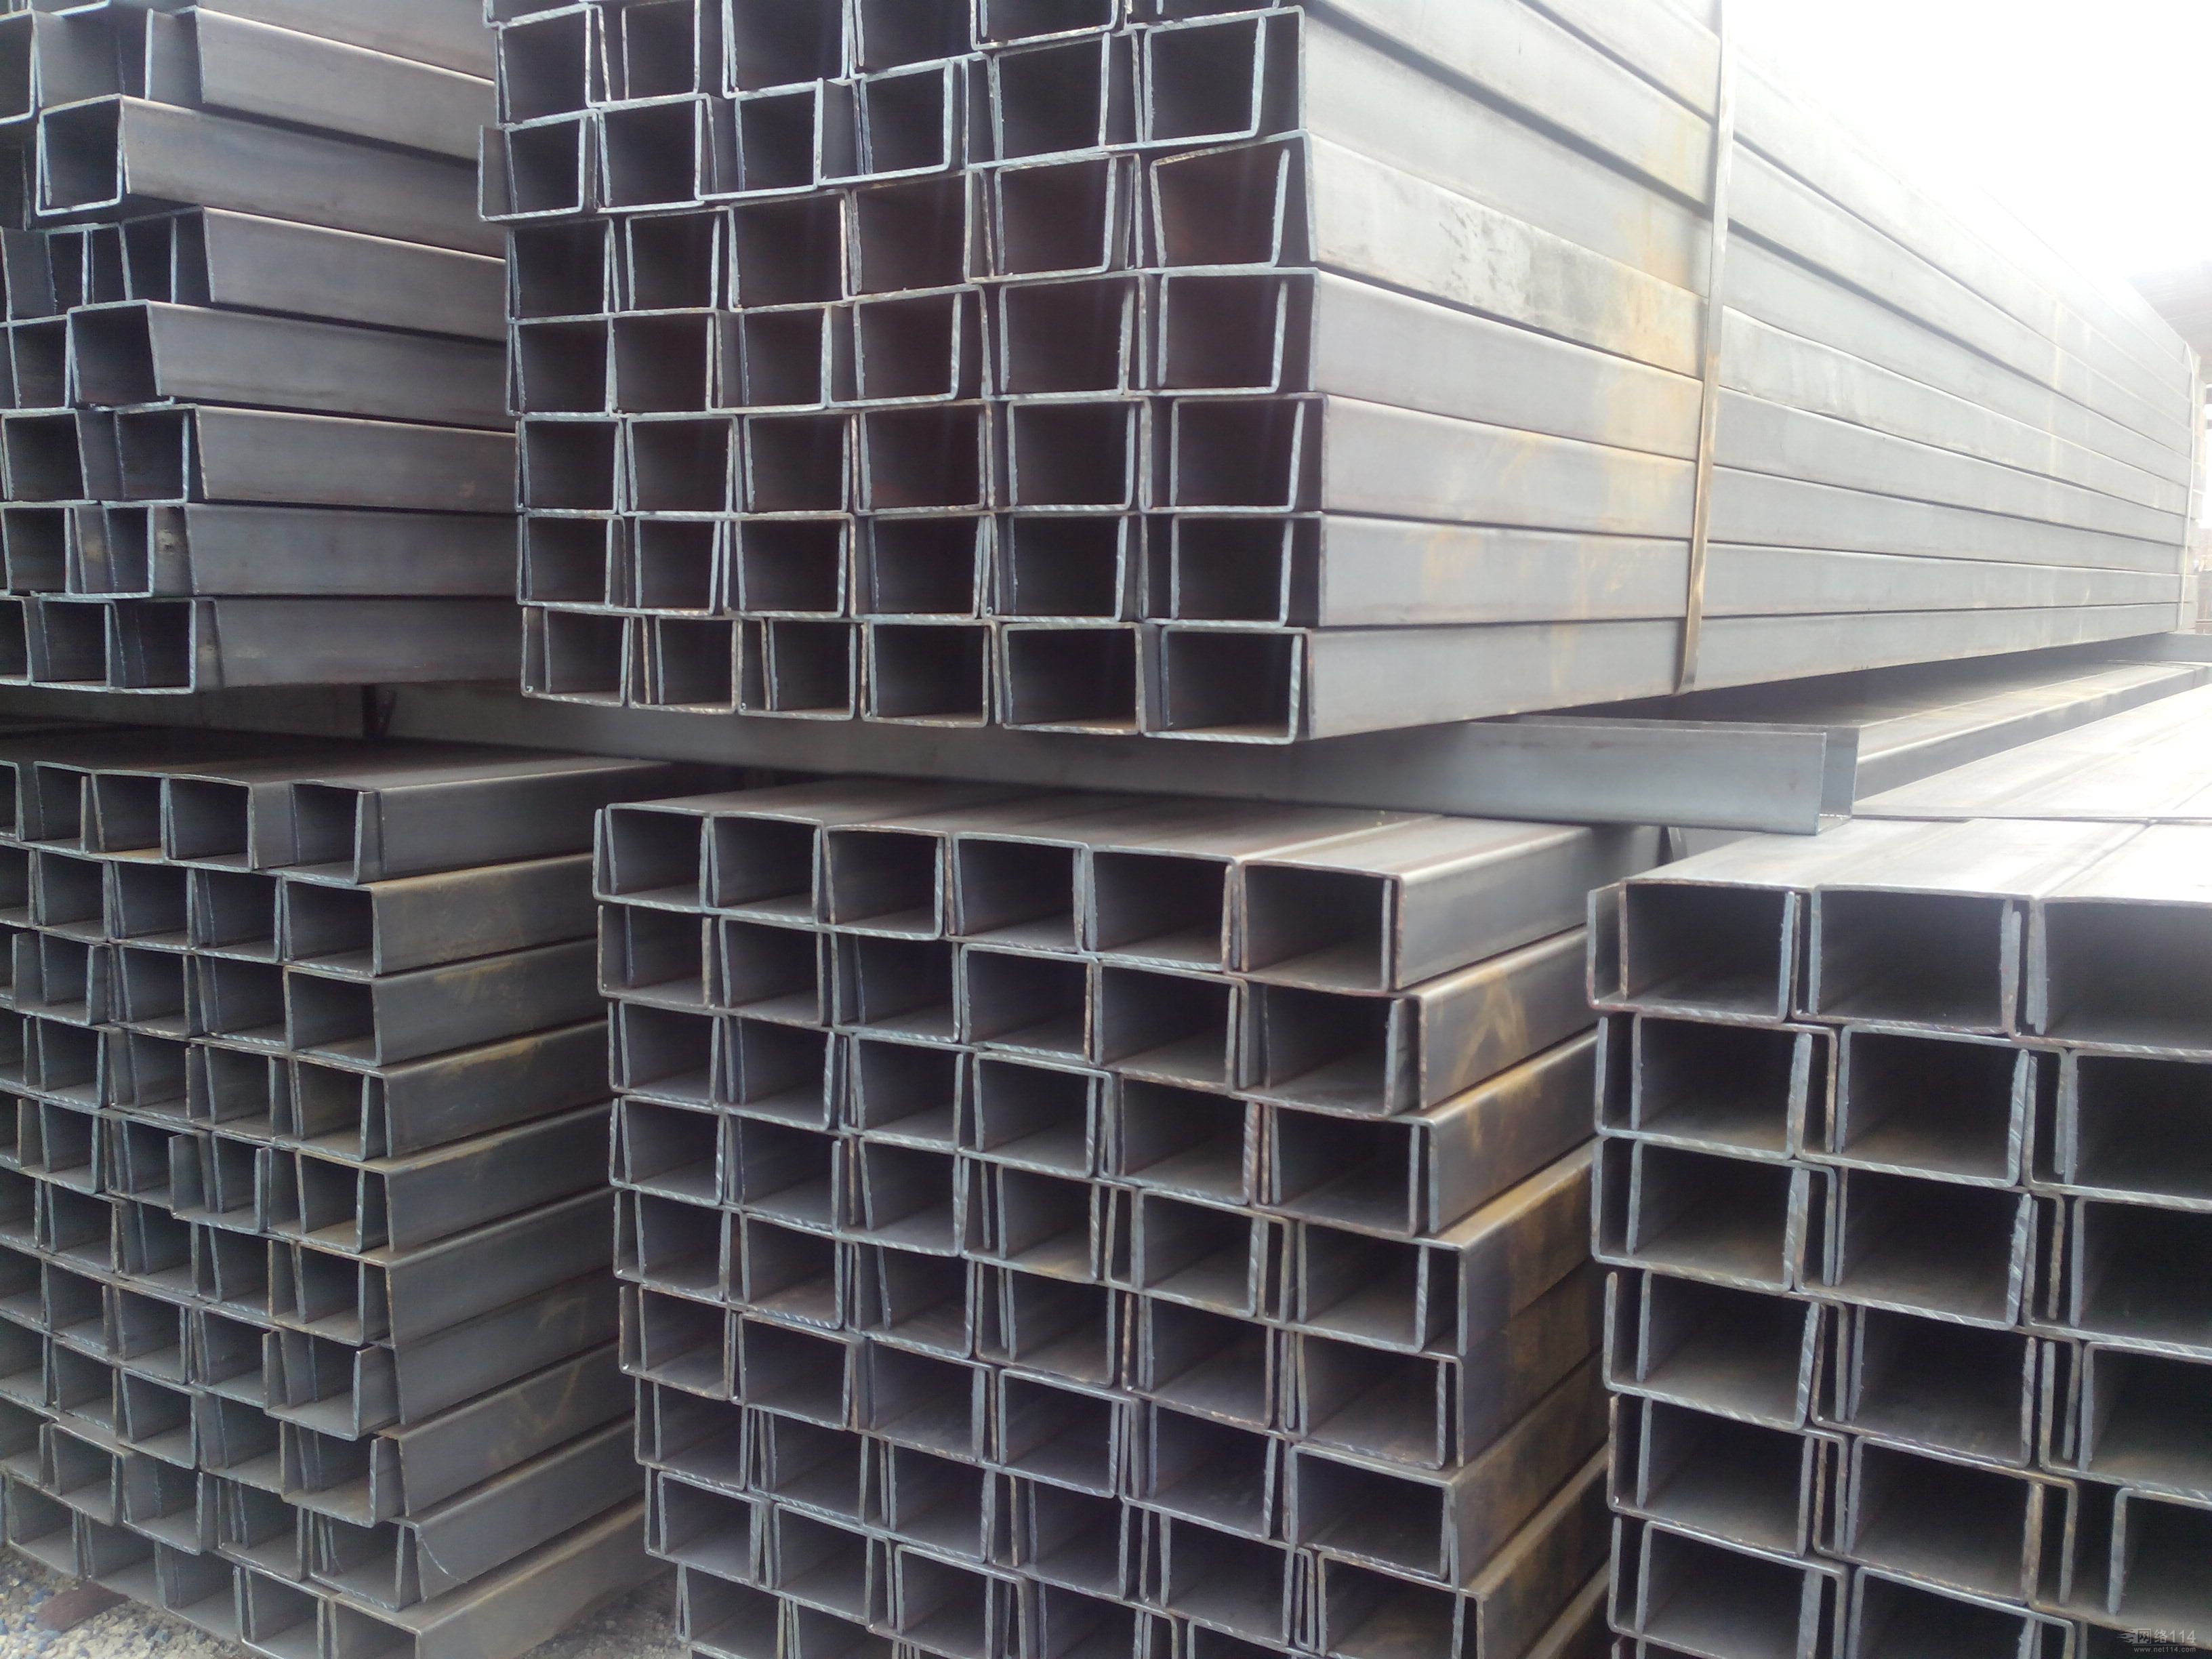 Hot Sale Q235 Q215 Channel Steel Size 50x25 Channel Section Hot Rolled Steel U Beam Channel Bar 